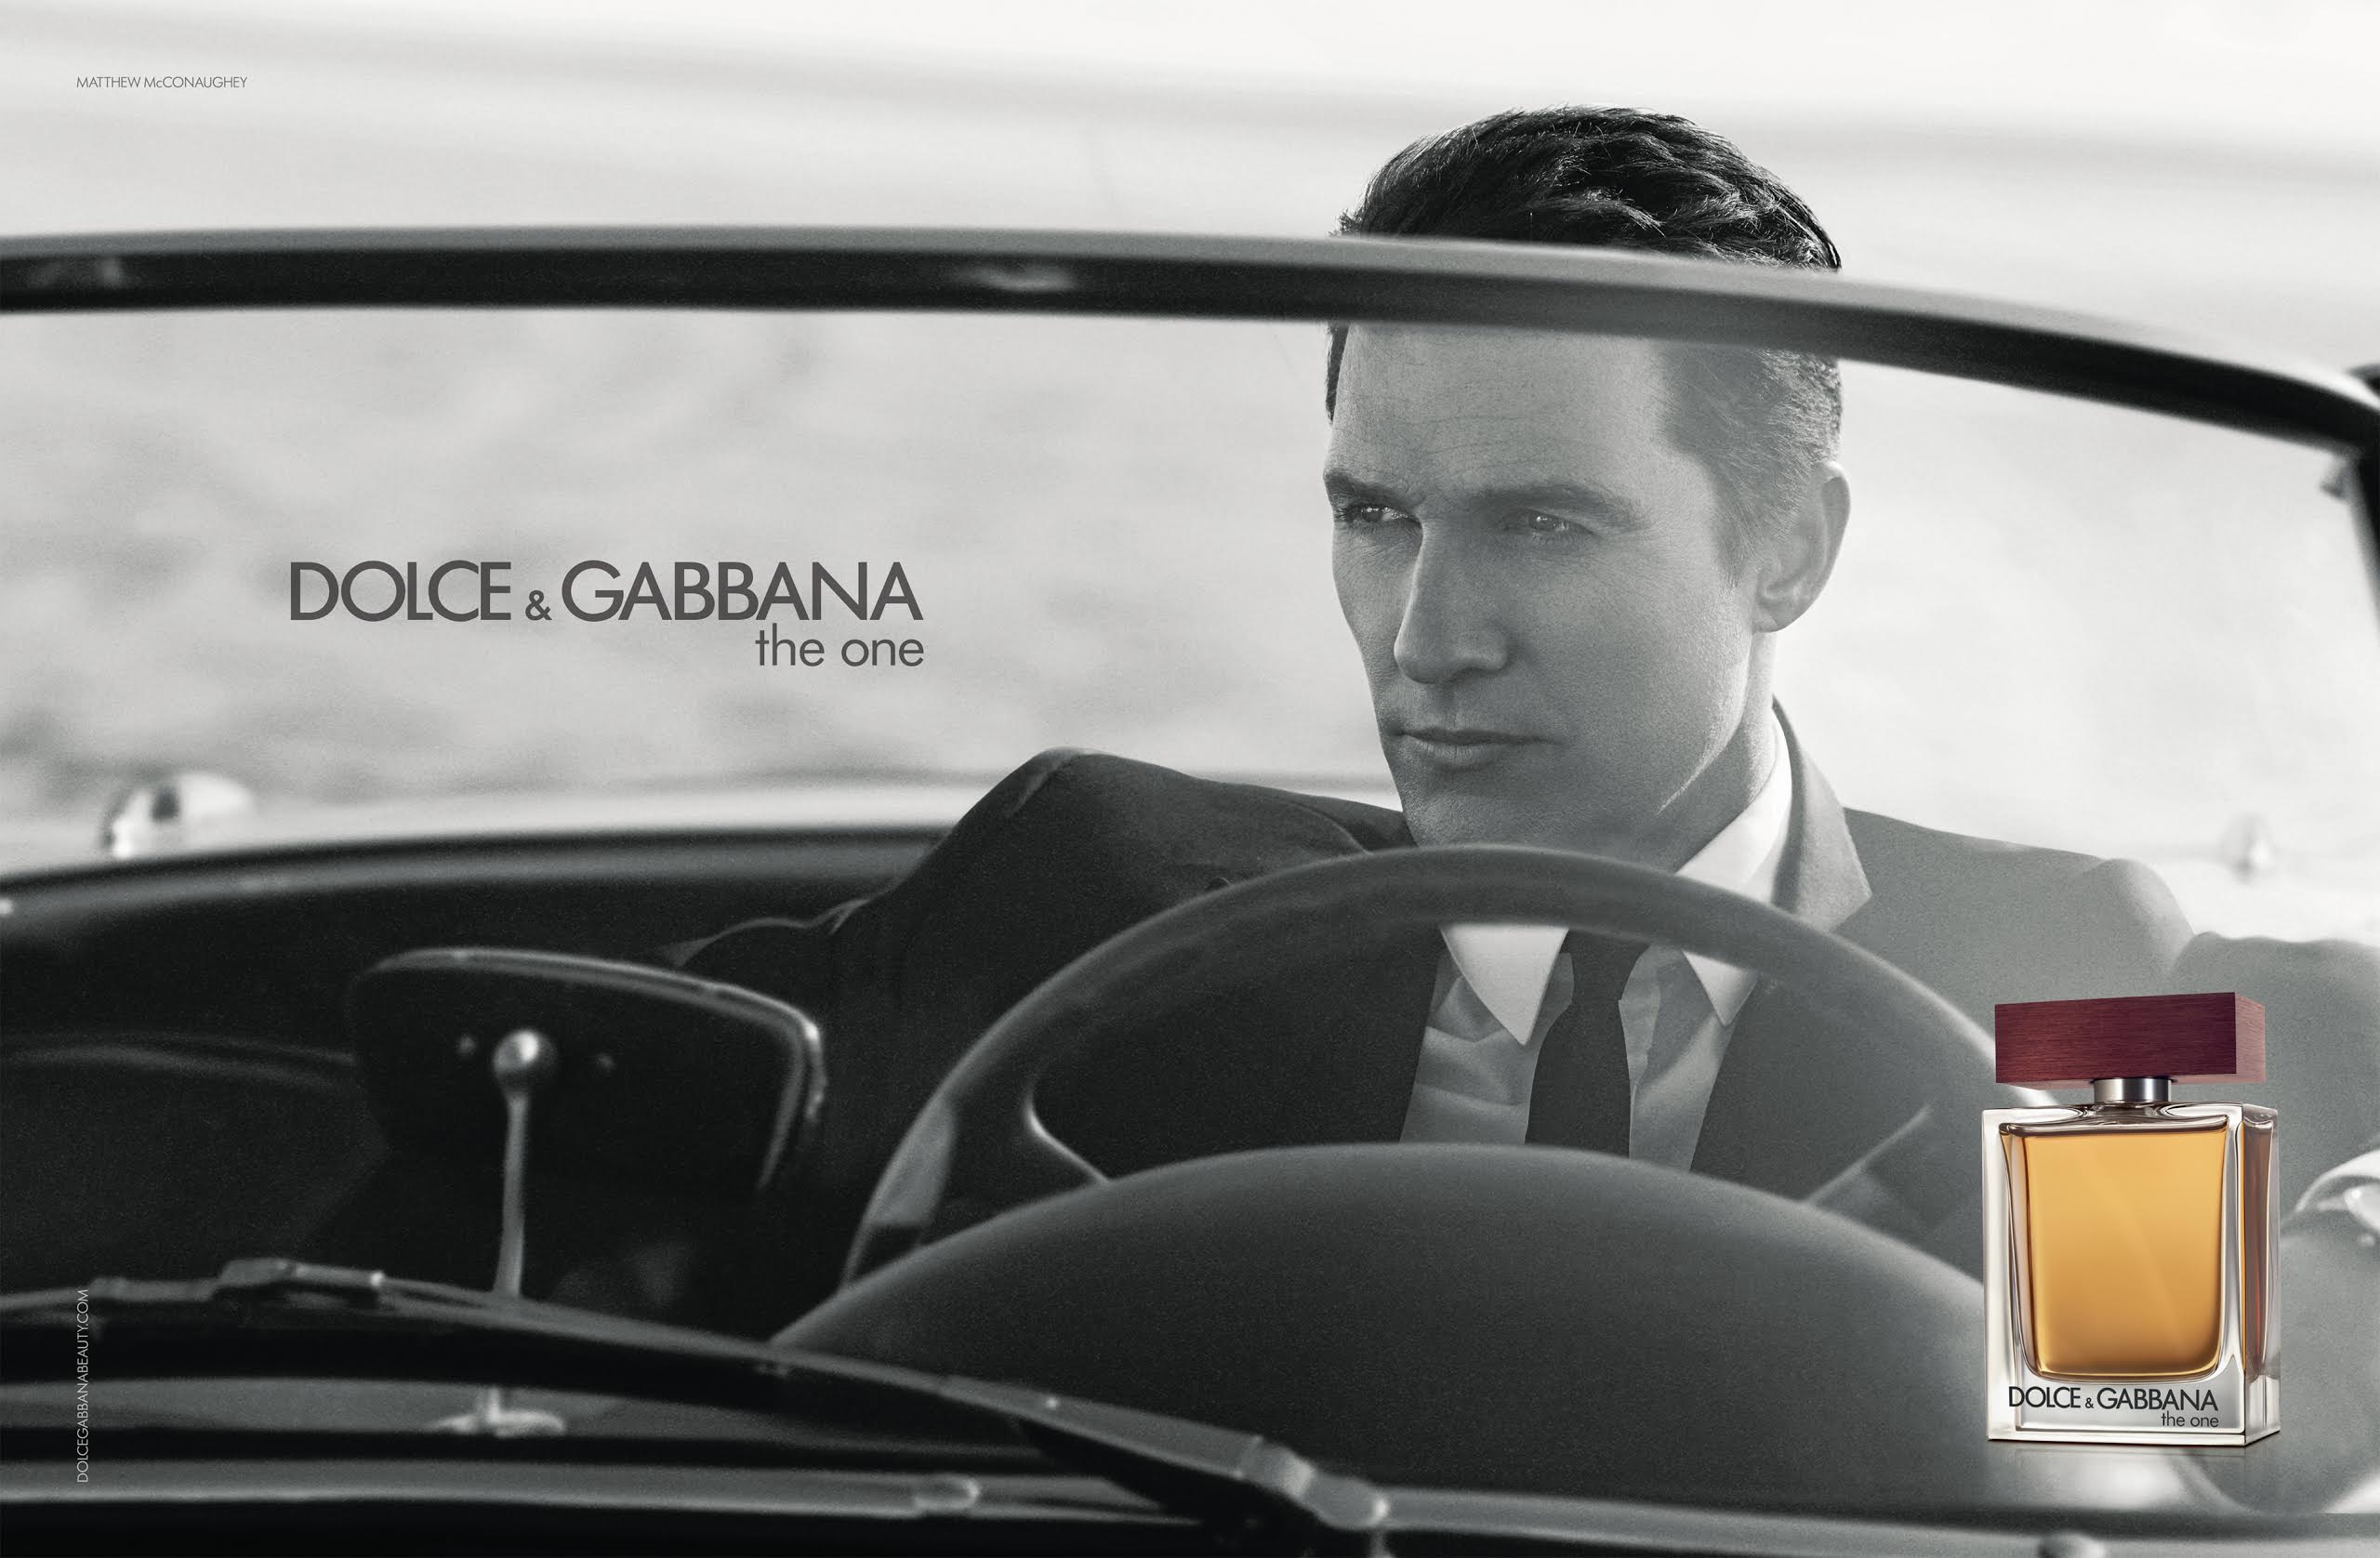 Matthew McConaughey Gets Behind the Wheel for New Image from Dolce & Gabbana 'The One' Fragrance Campaign